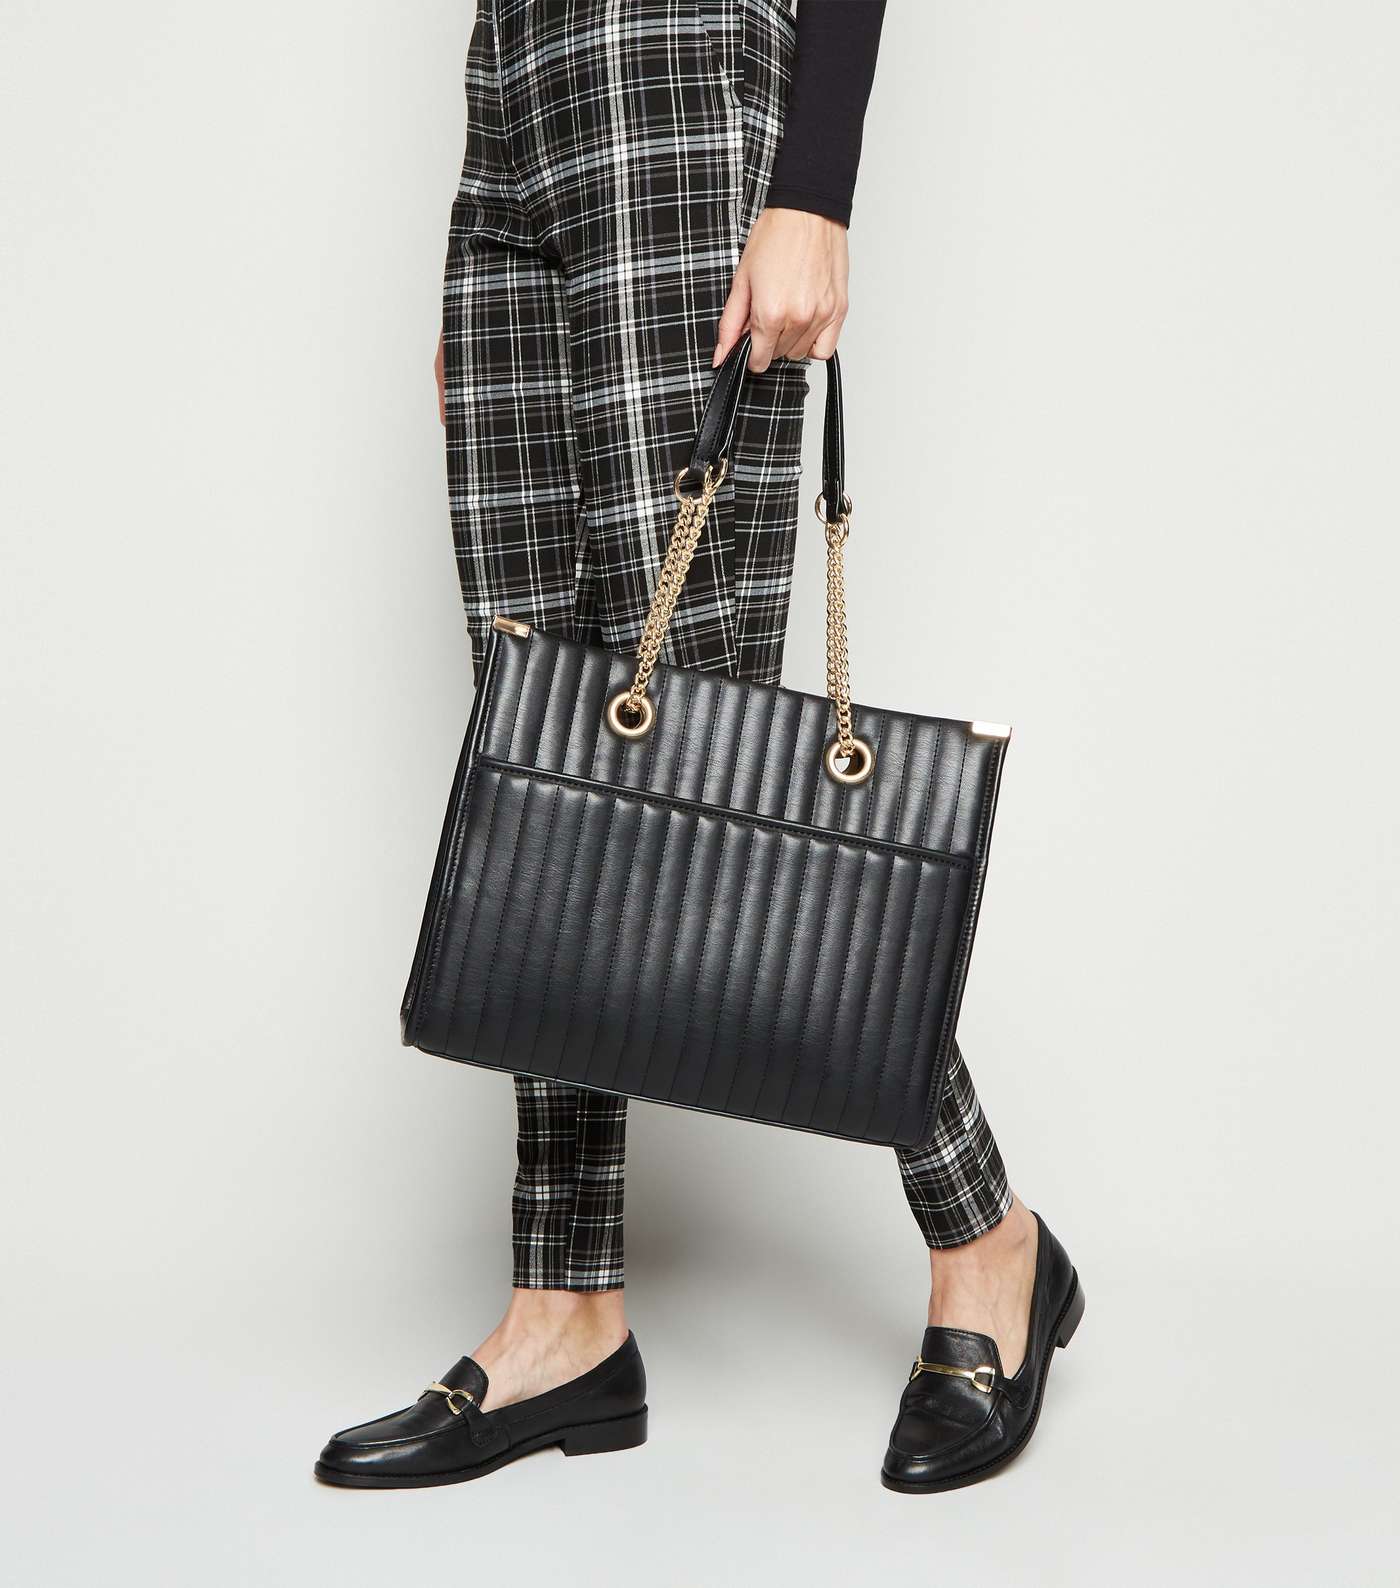 Black Leather-Look Quilted Tote Bag Image 2